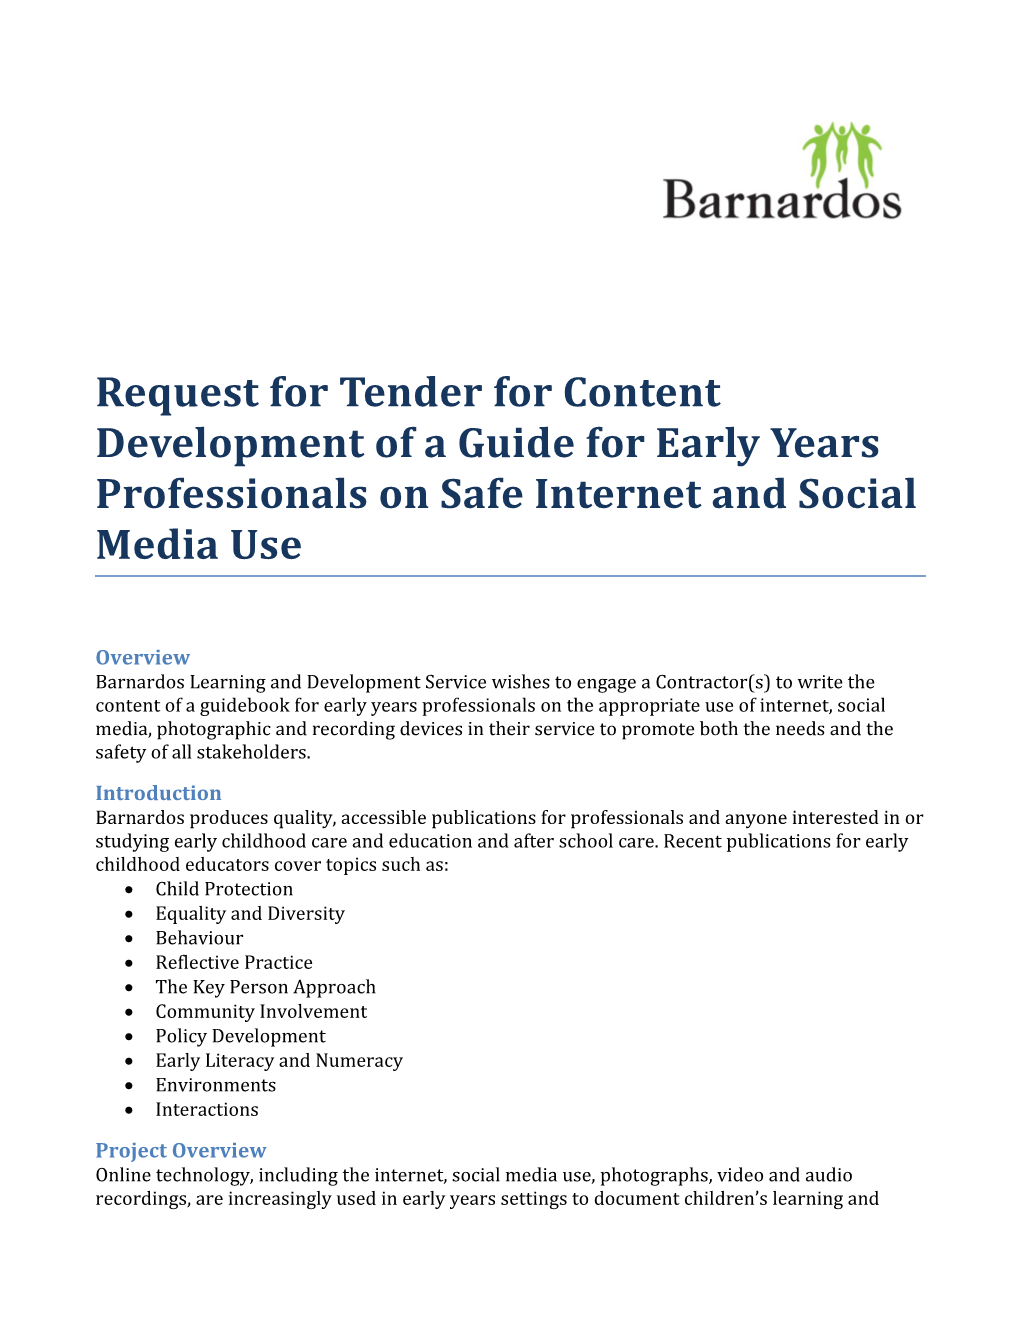 Request for Tender for Content Development Ofa Guide for Early Years Professionals on Safe